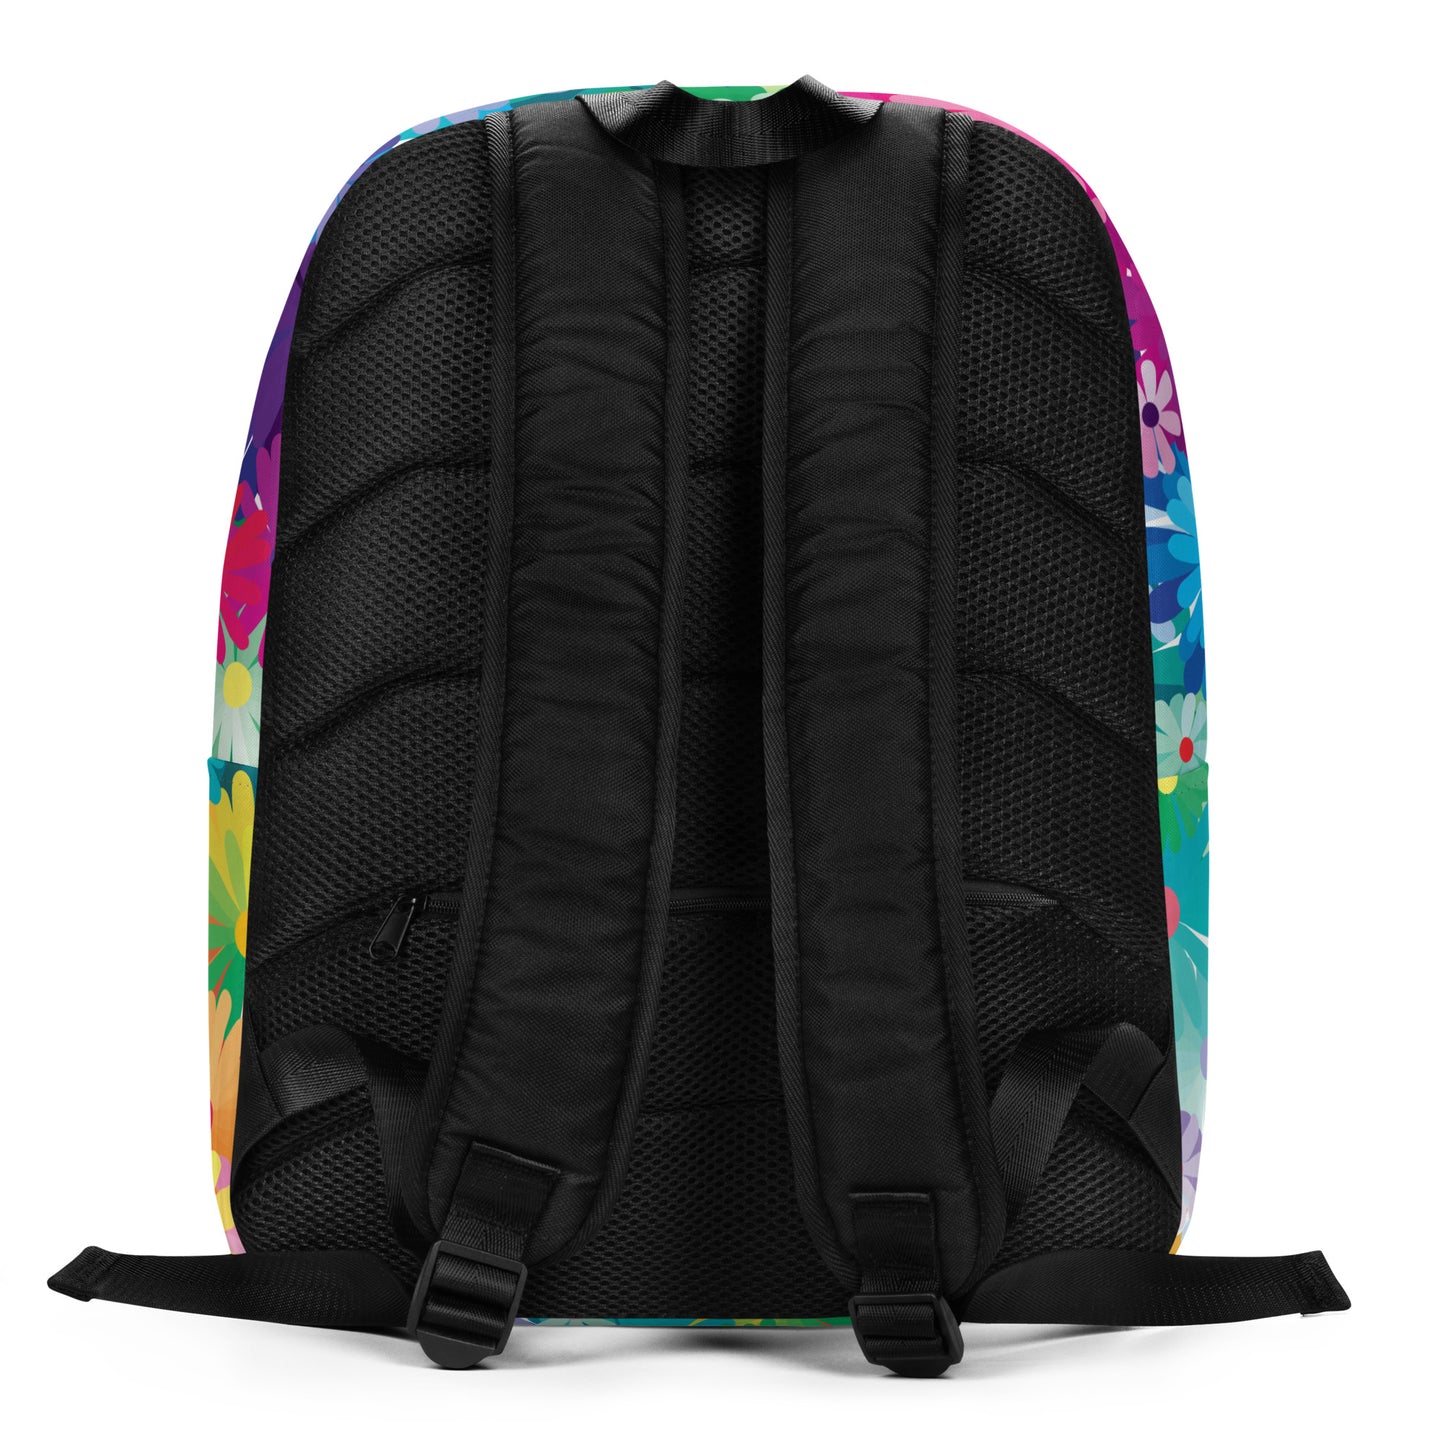 #WEIRDO | This minimalistic, colorful backpack is pretty and has a weird fun meme at the front of the bag. Fun meme: Born a Weirdo. Check out more pretty but weird stuff out in our online giftstore for weirdos!